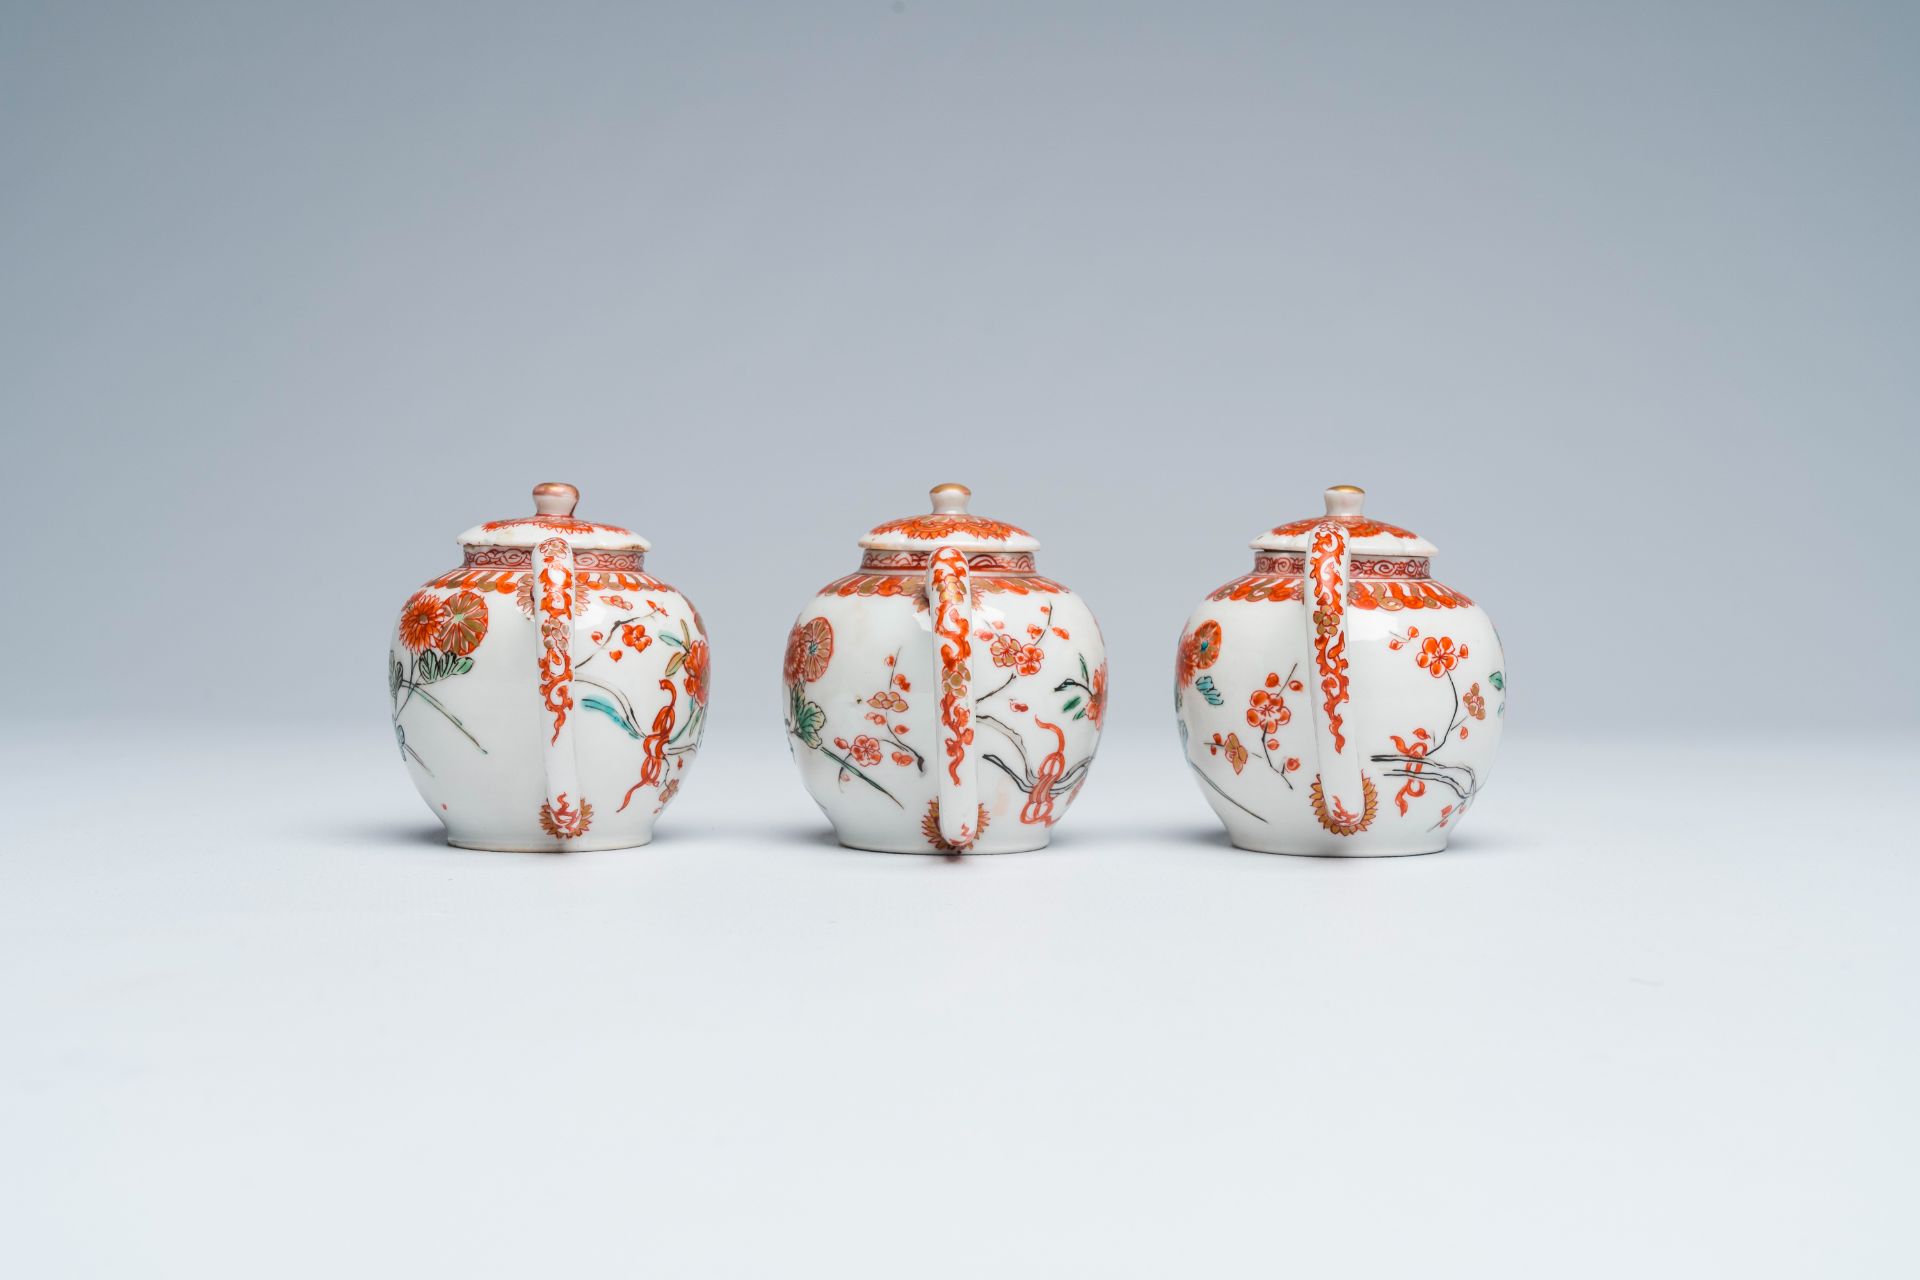 Three Japanese Kakiemon style teapots and covers with floral design, Edo, late 17th C. - Image 5 of 7